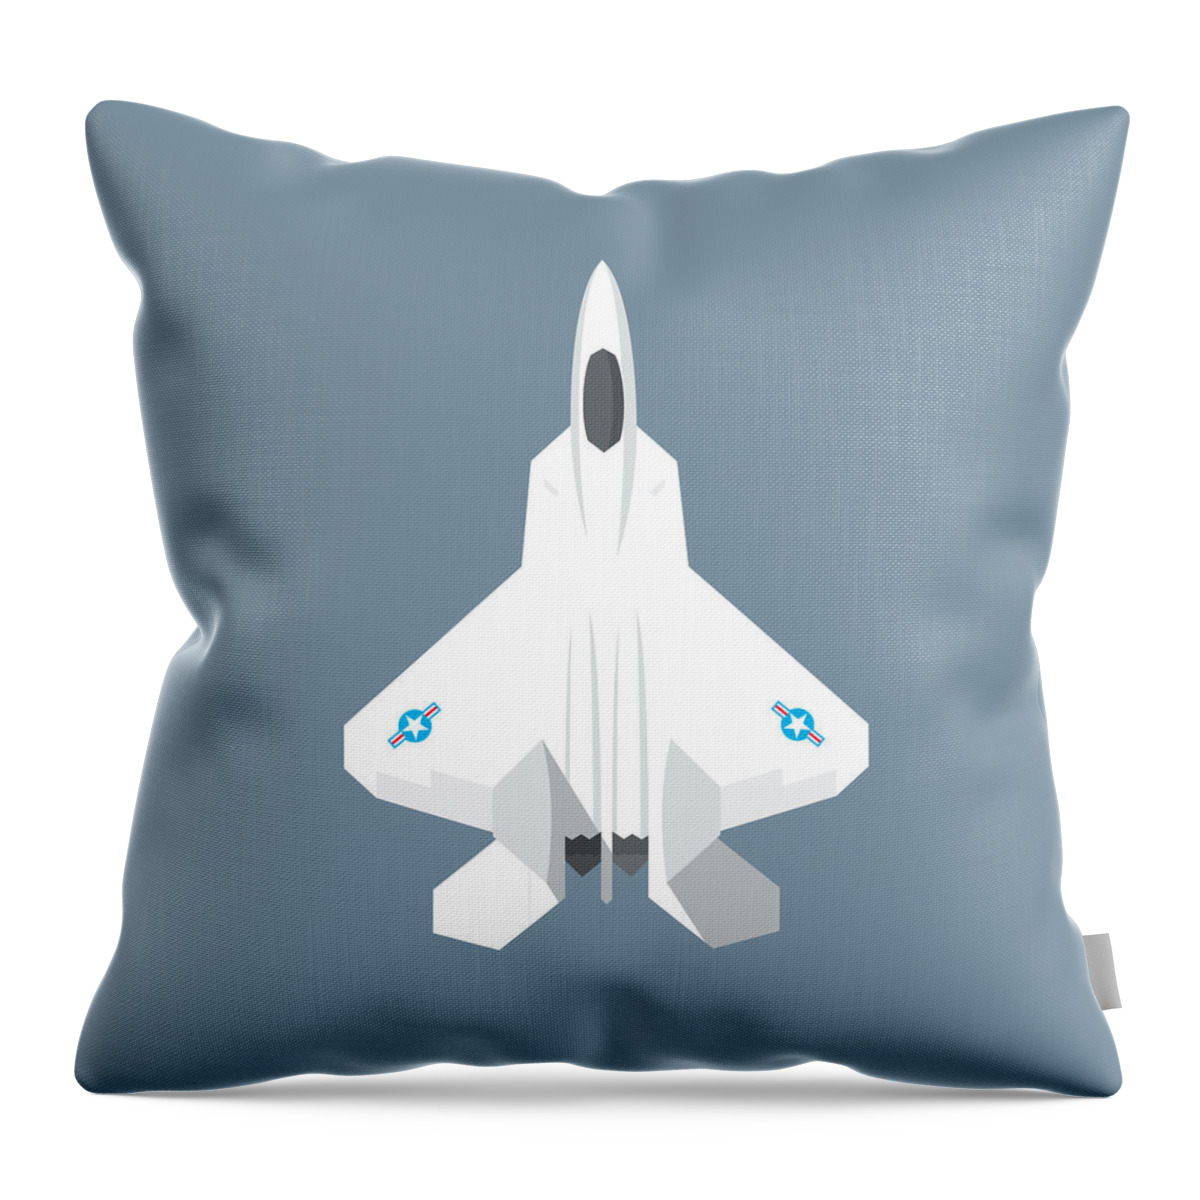 Jet Throw Pillow featuring the digital art F-22 Raptor Jet Fighter Aircraft - Slate by Organic Synthesis